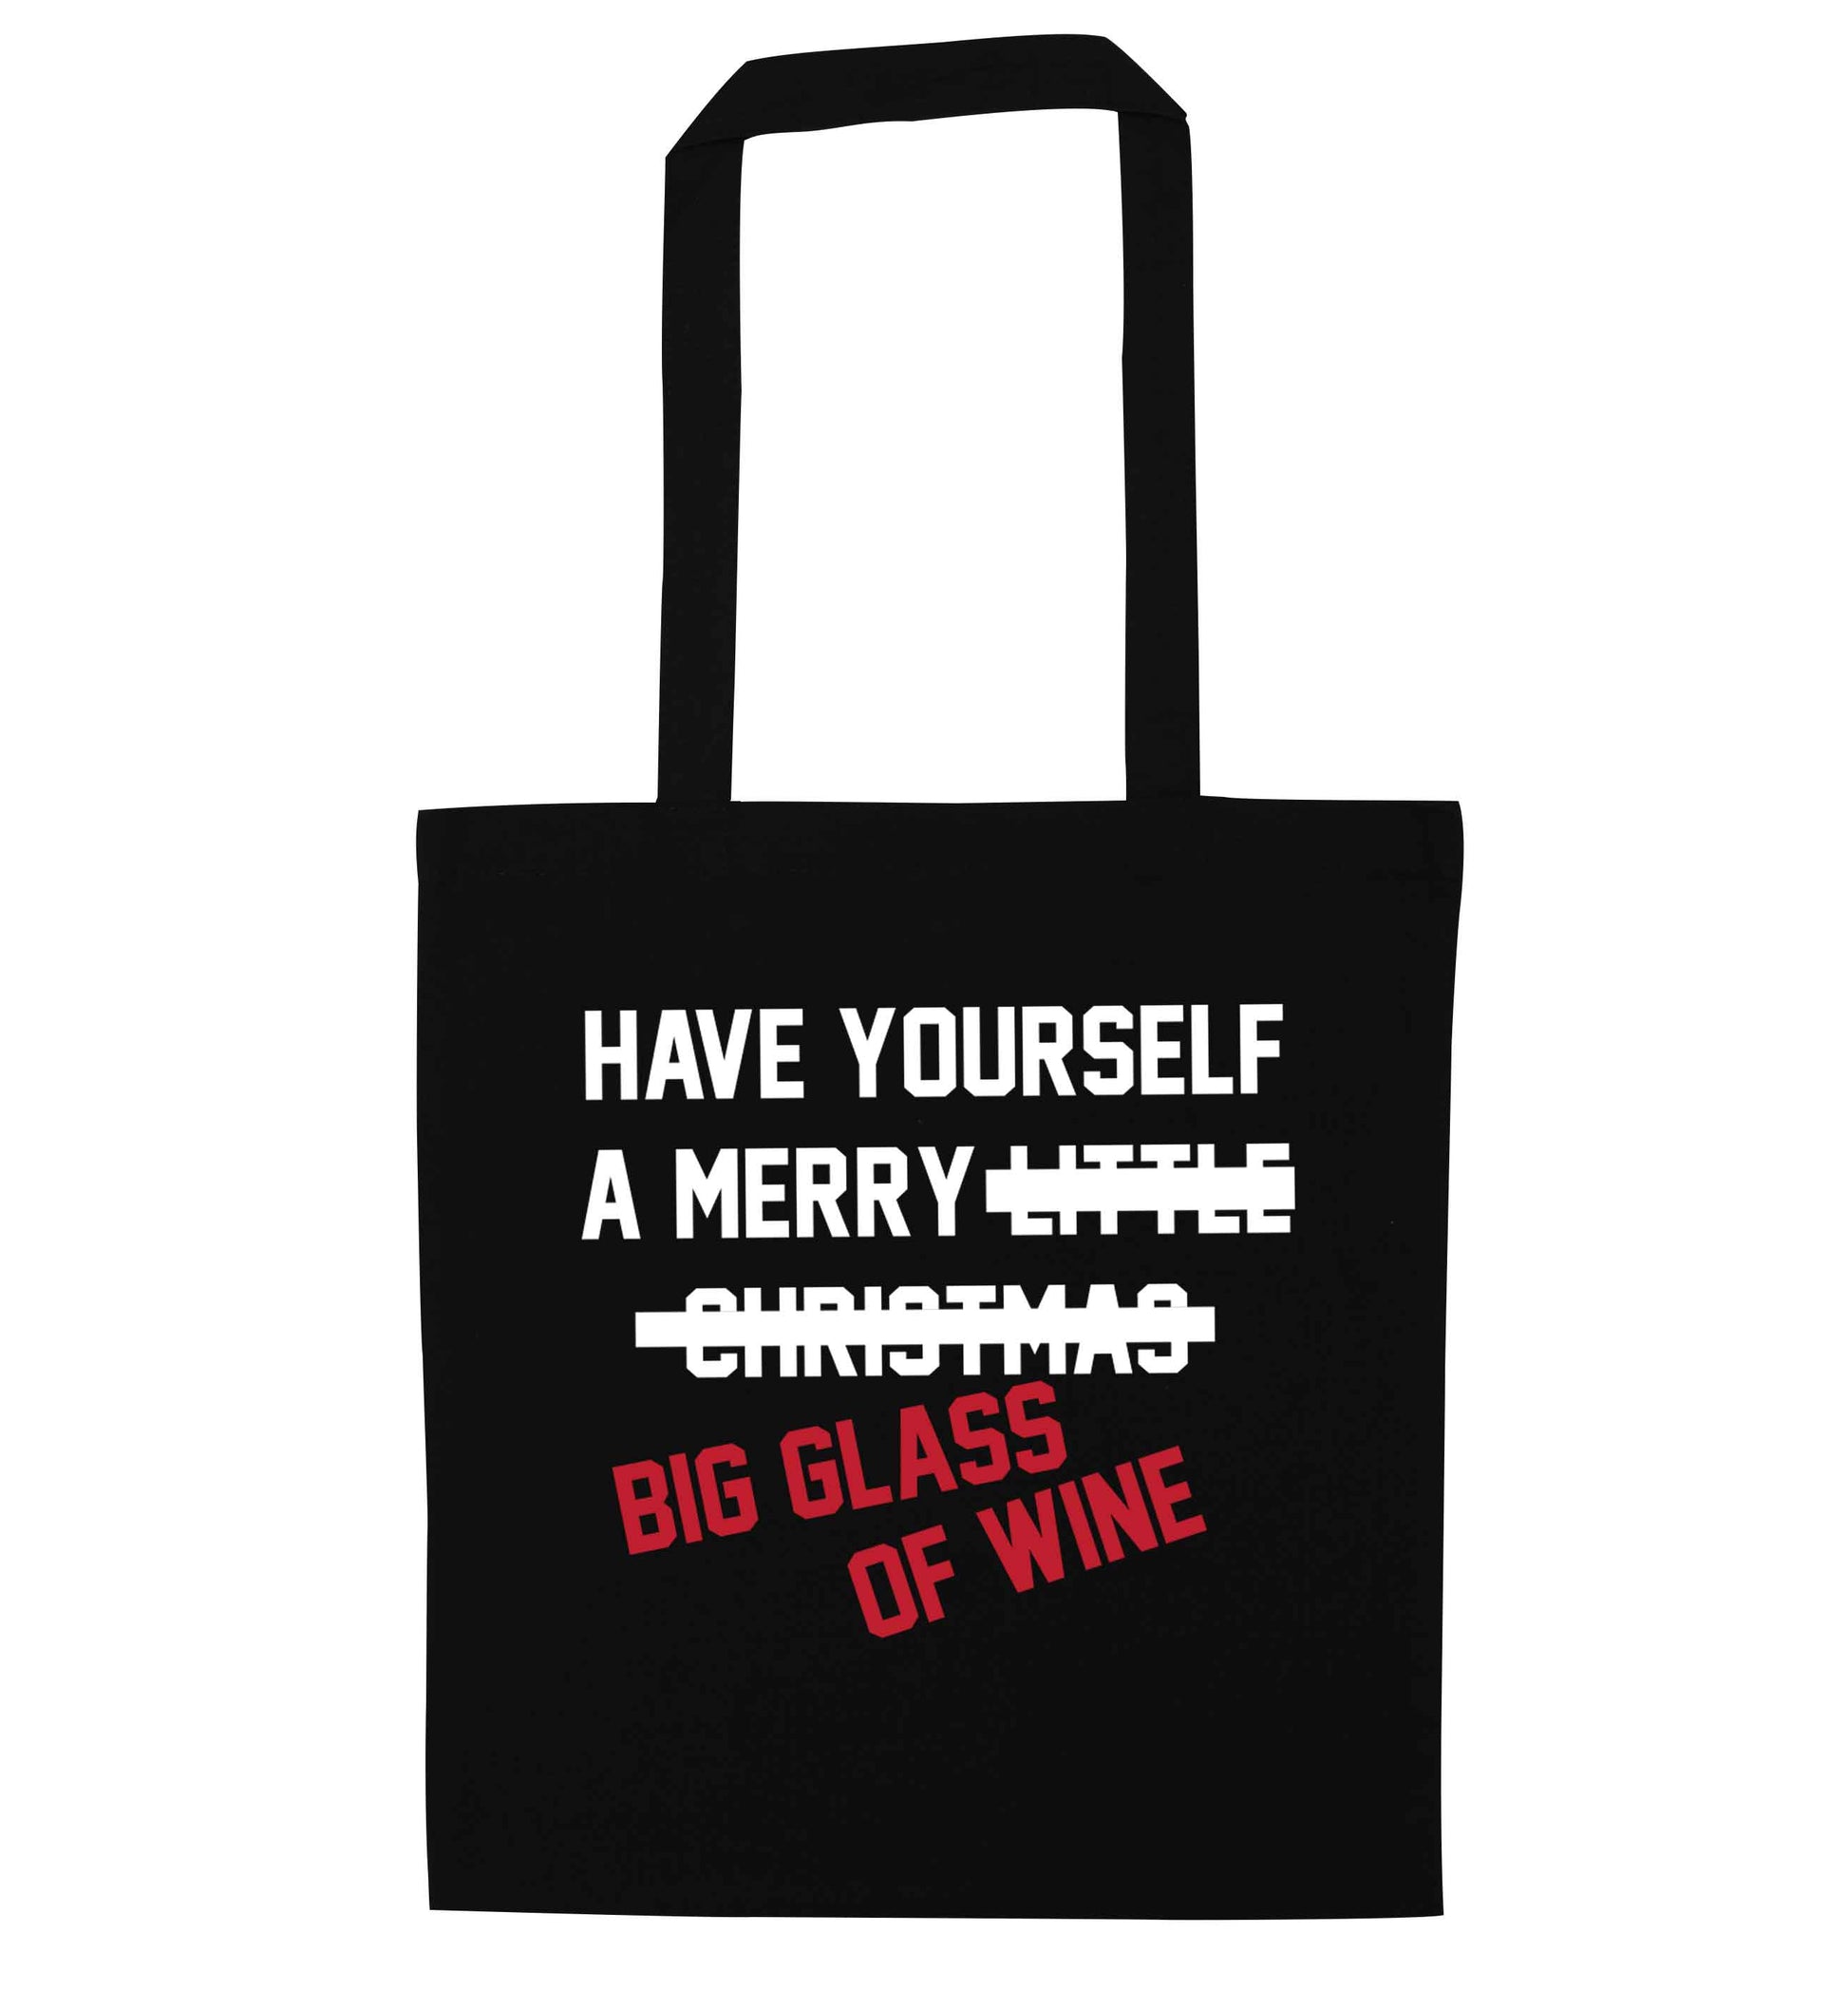 Have yourself a merry big glass of wine black tote bag